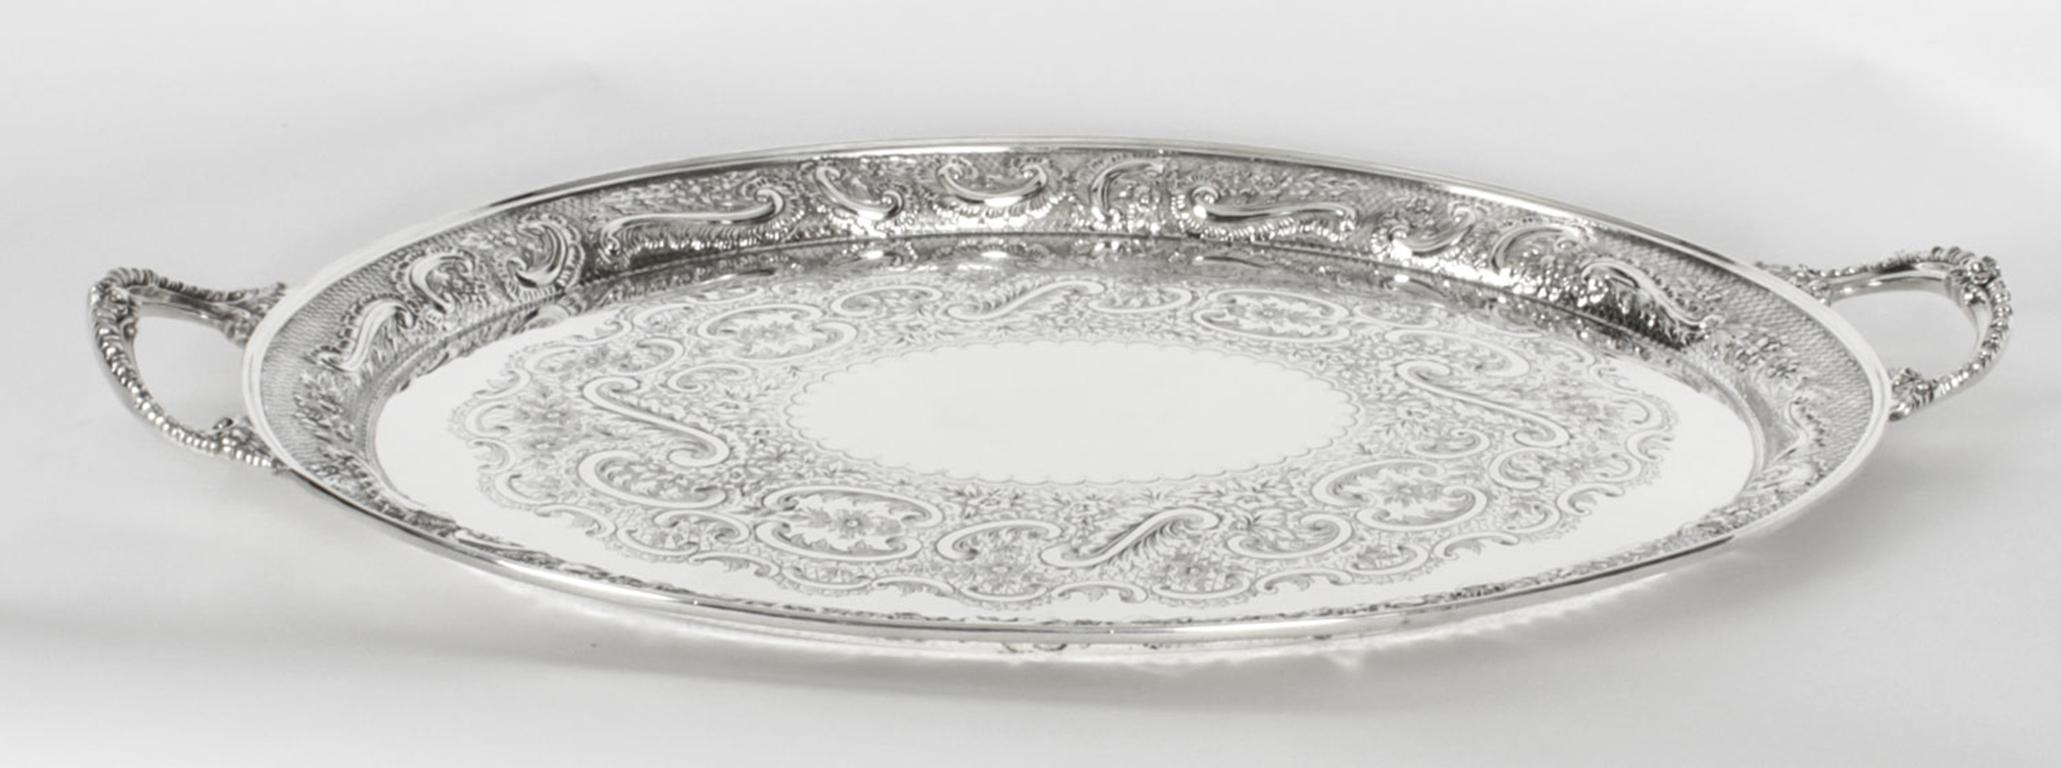 English Antique Oval Victorian Silver Plated Tray by Mappin & Webb, 19th Century